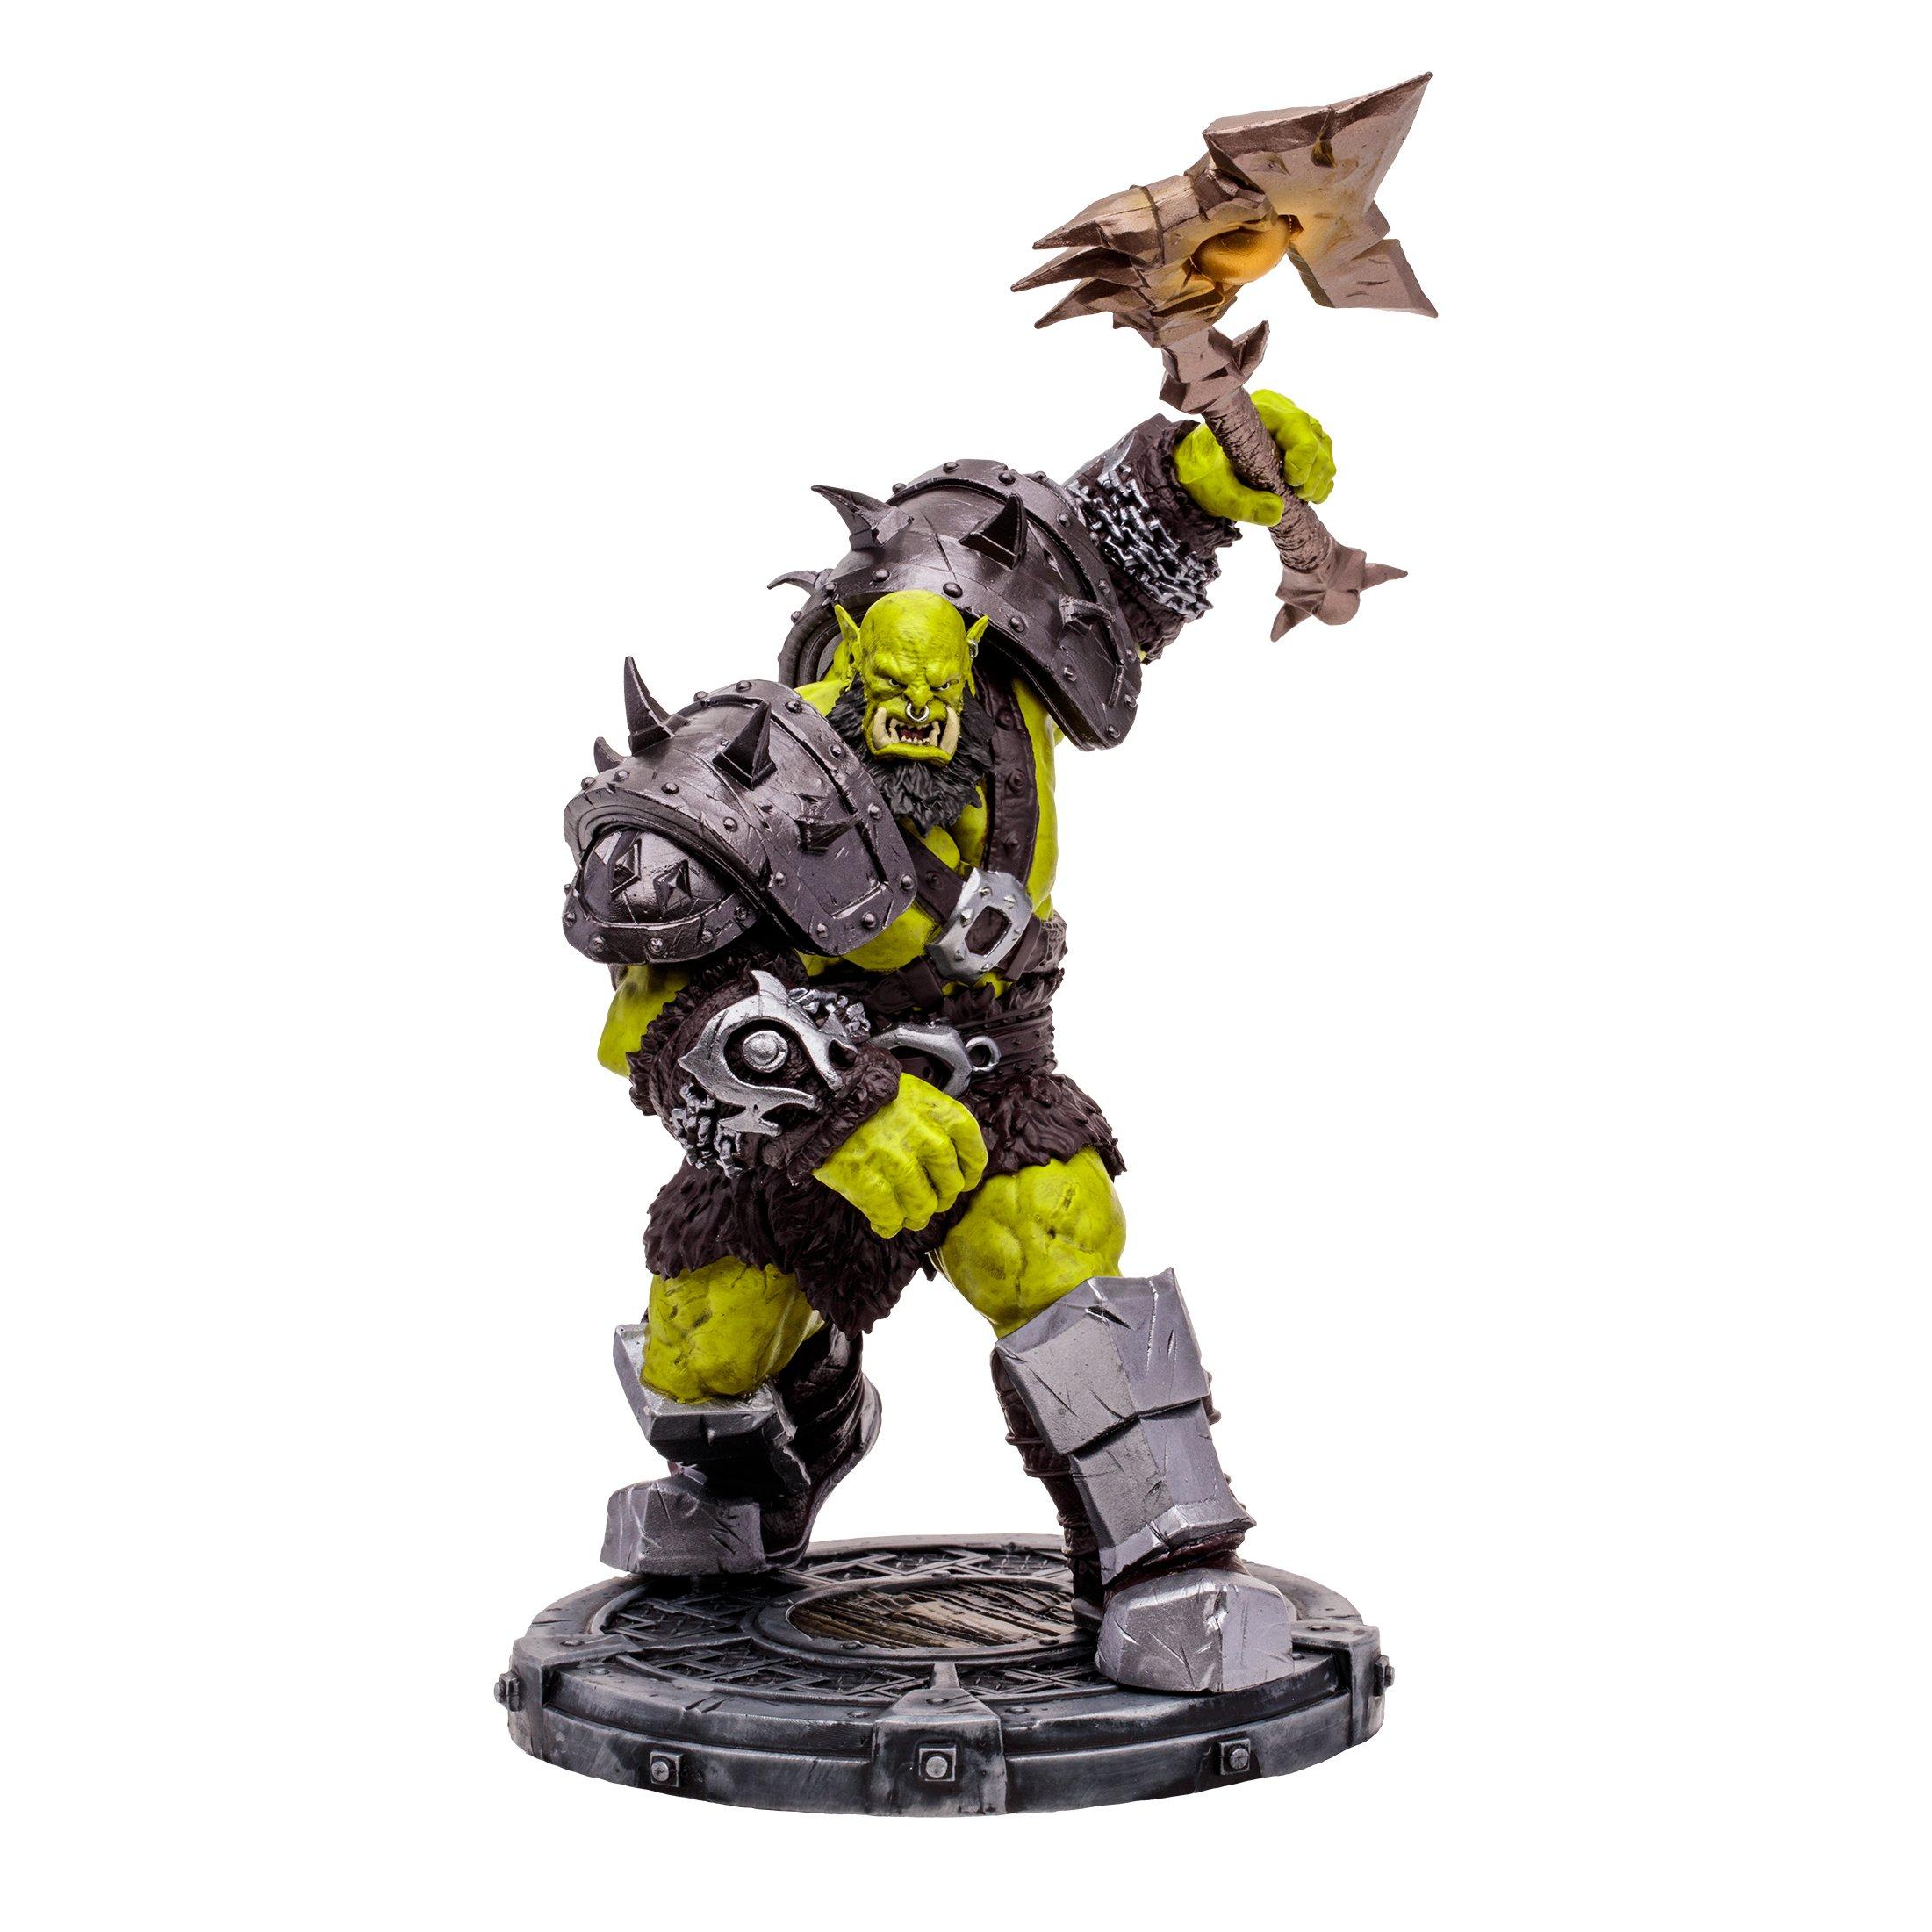 McFarlane Toys World of Warcraft Orc: Shaman/Warrior (Rare) 6-in Action Figure